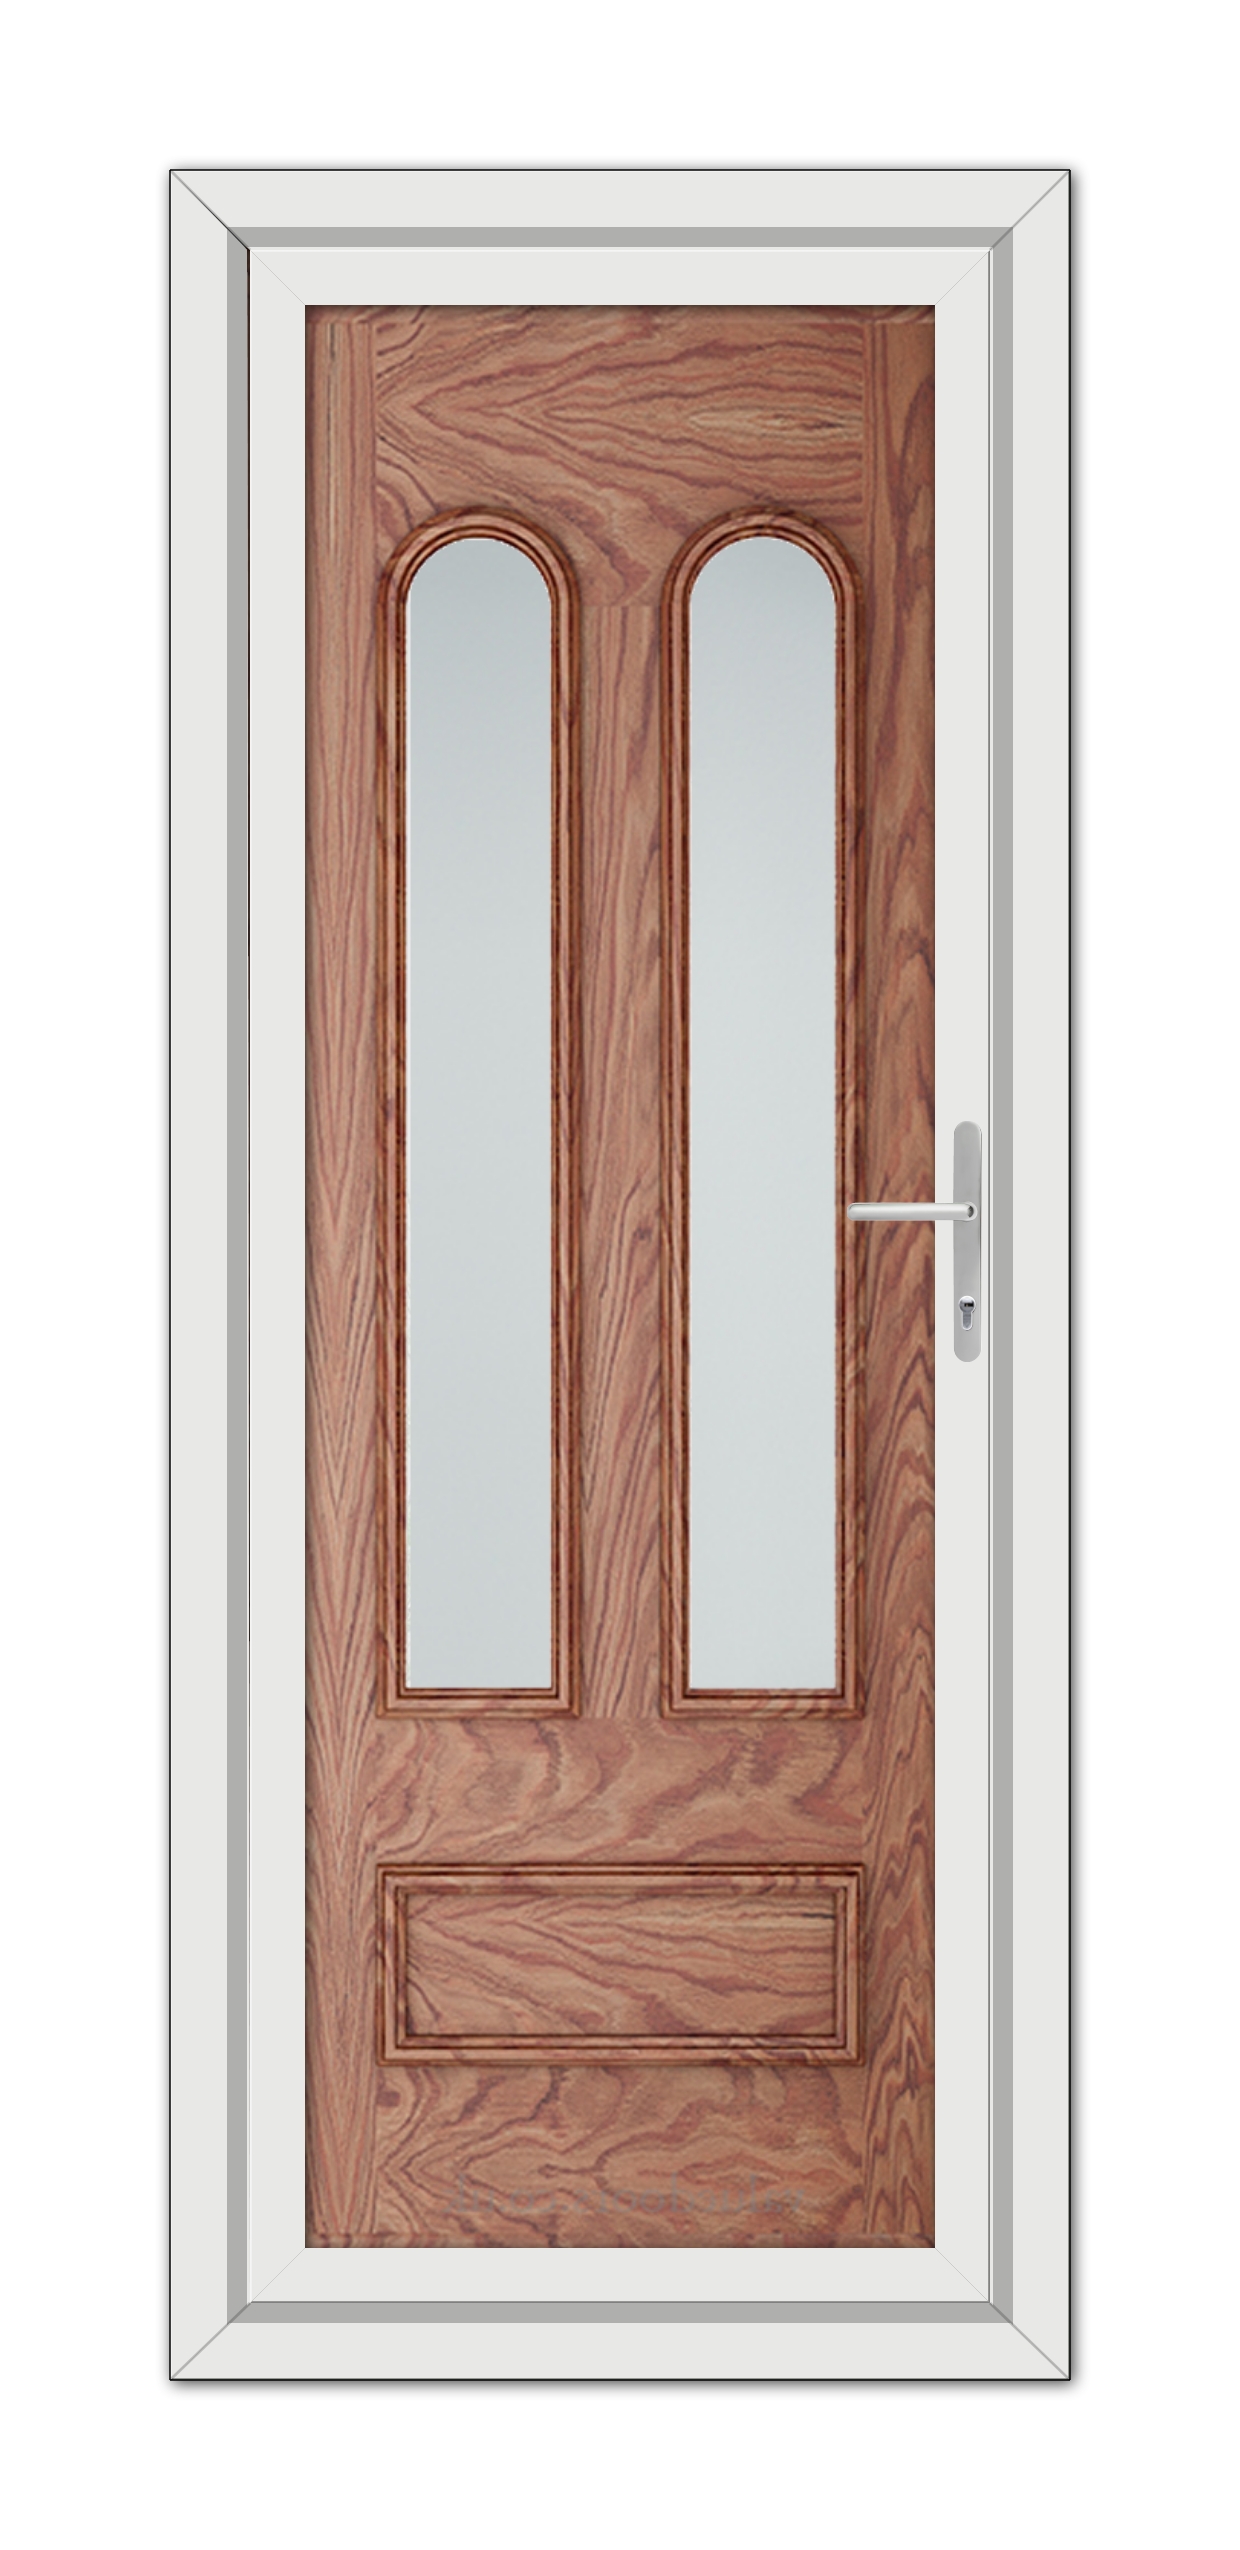 A Solid Oak Madrid uPVC Door with two vertical glass panels, surrounded by a white frame, featuring a silver handle on the right side.